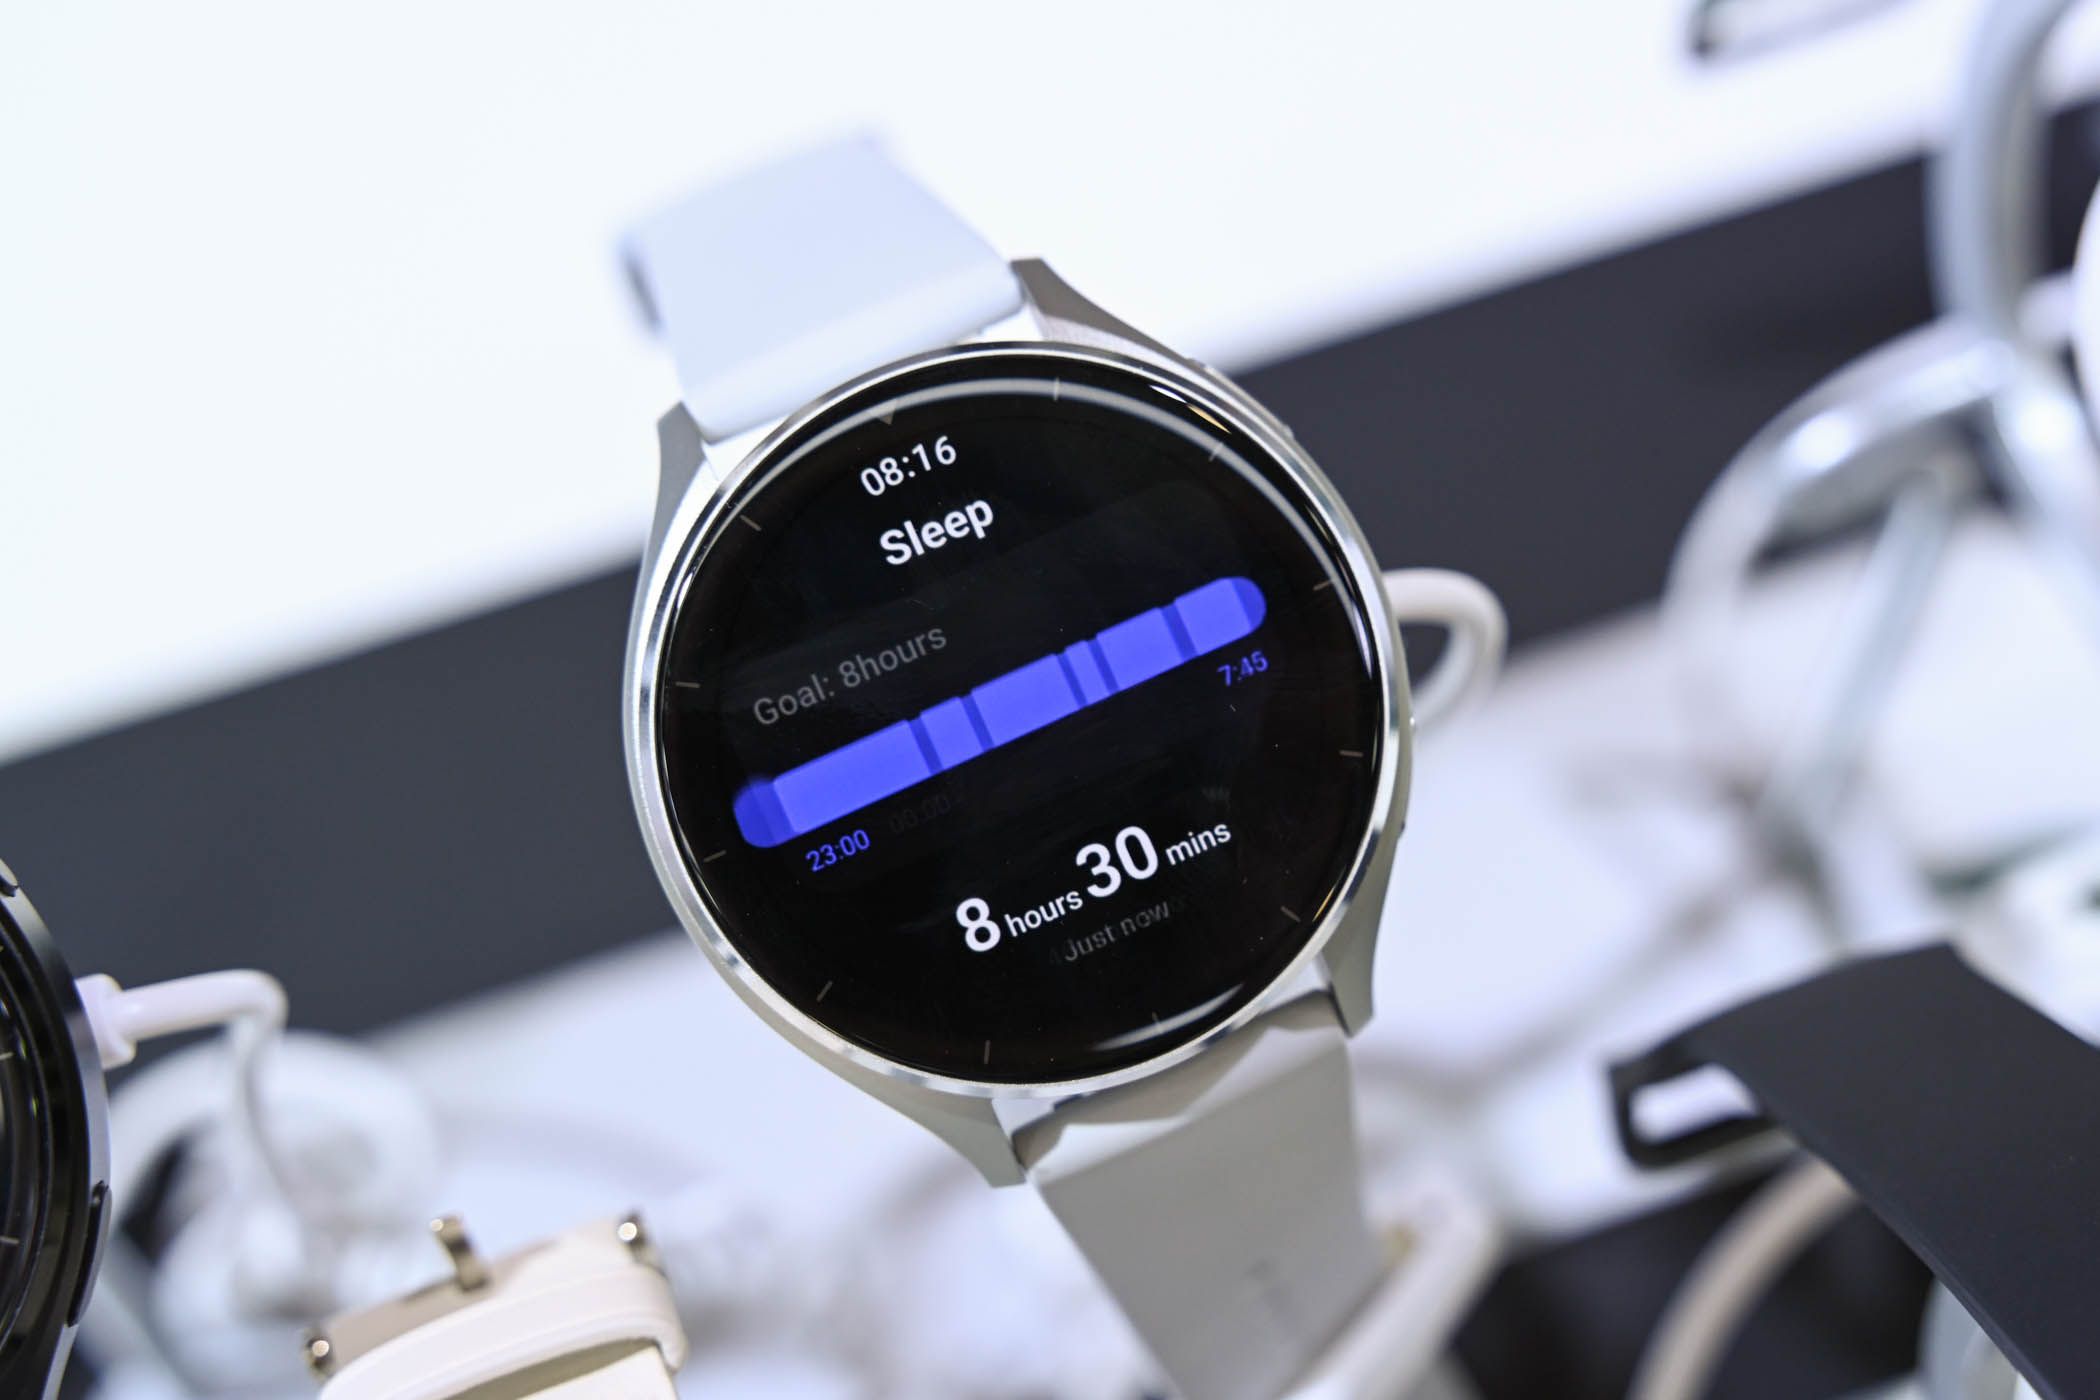 Sleep tracking on a smart watch with Wear OS by Google